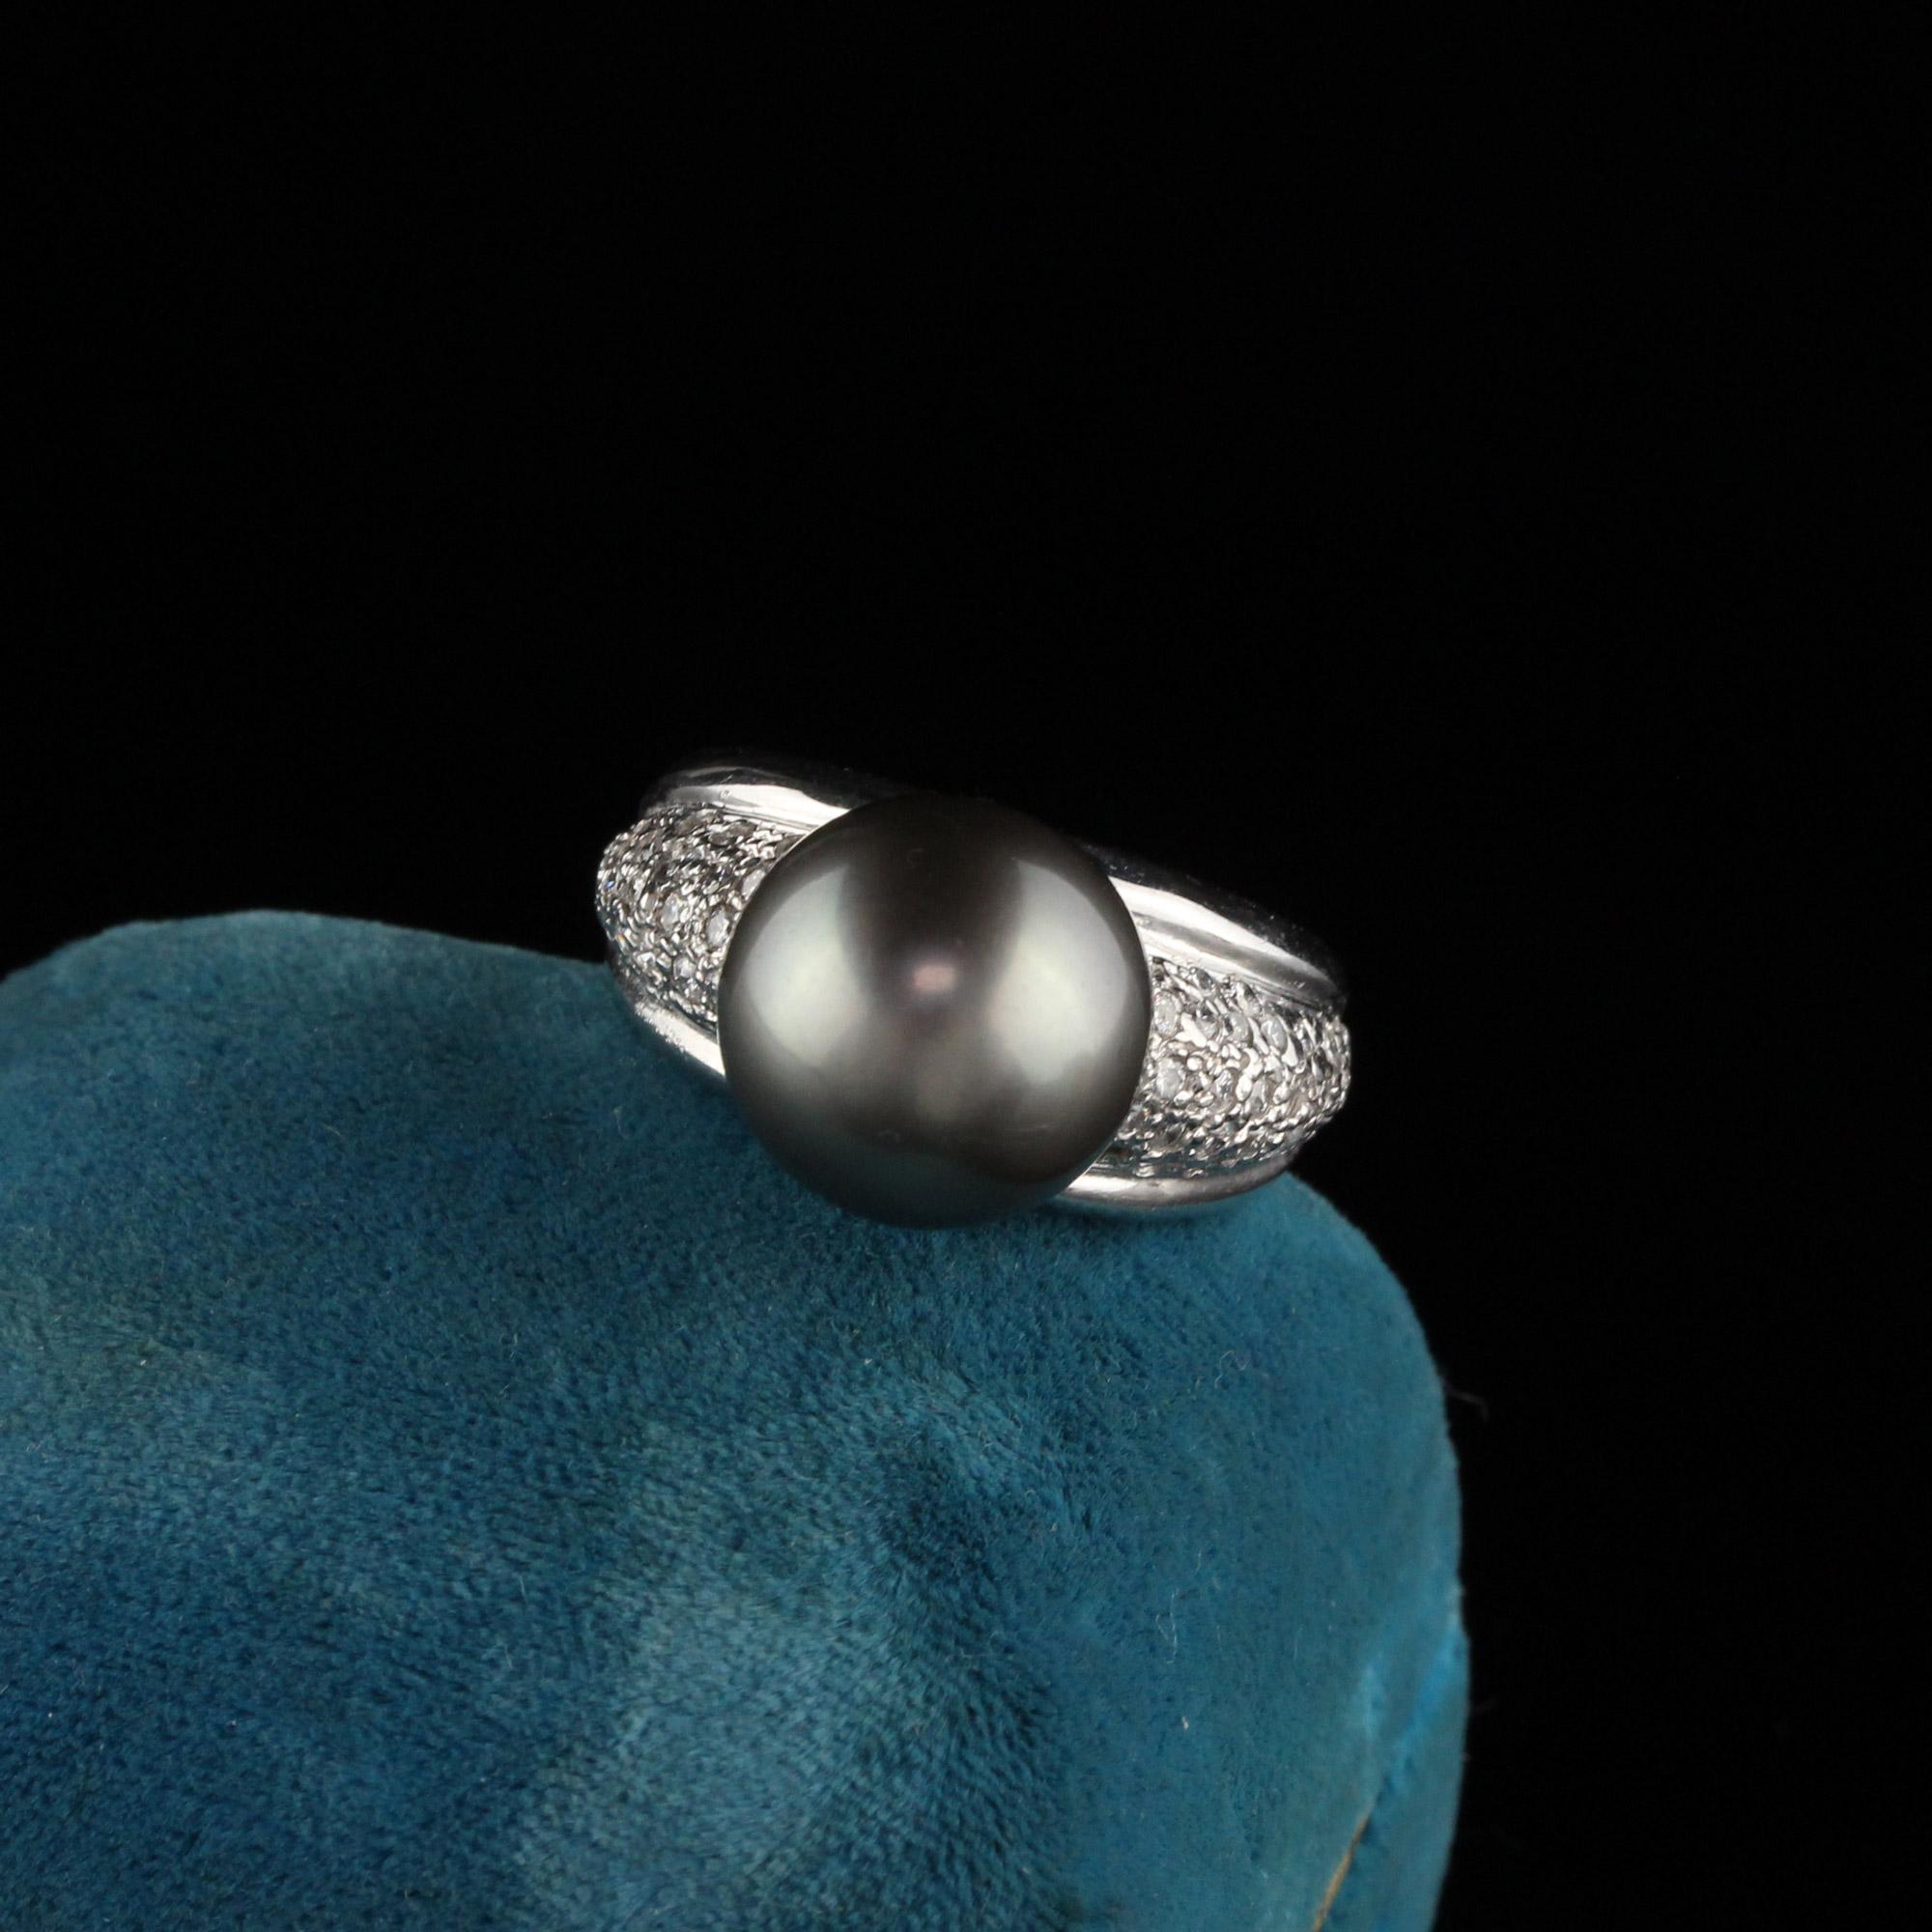 Beautiful Diamond and Tahitian Pearl Ring.

Metal: White Gold

Weight: 12.6 Grams

Total Diamond Weight: Approximately 1 cts

Diamond Color: H

Diamond Clarity: SI1

Pearl Measurements: 12.2 mm

Ring Size: 7 (sizable)

Measurements: 10.6 x 14.9 mm
